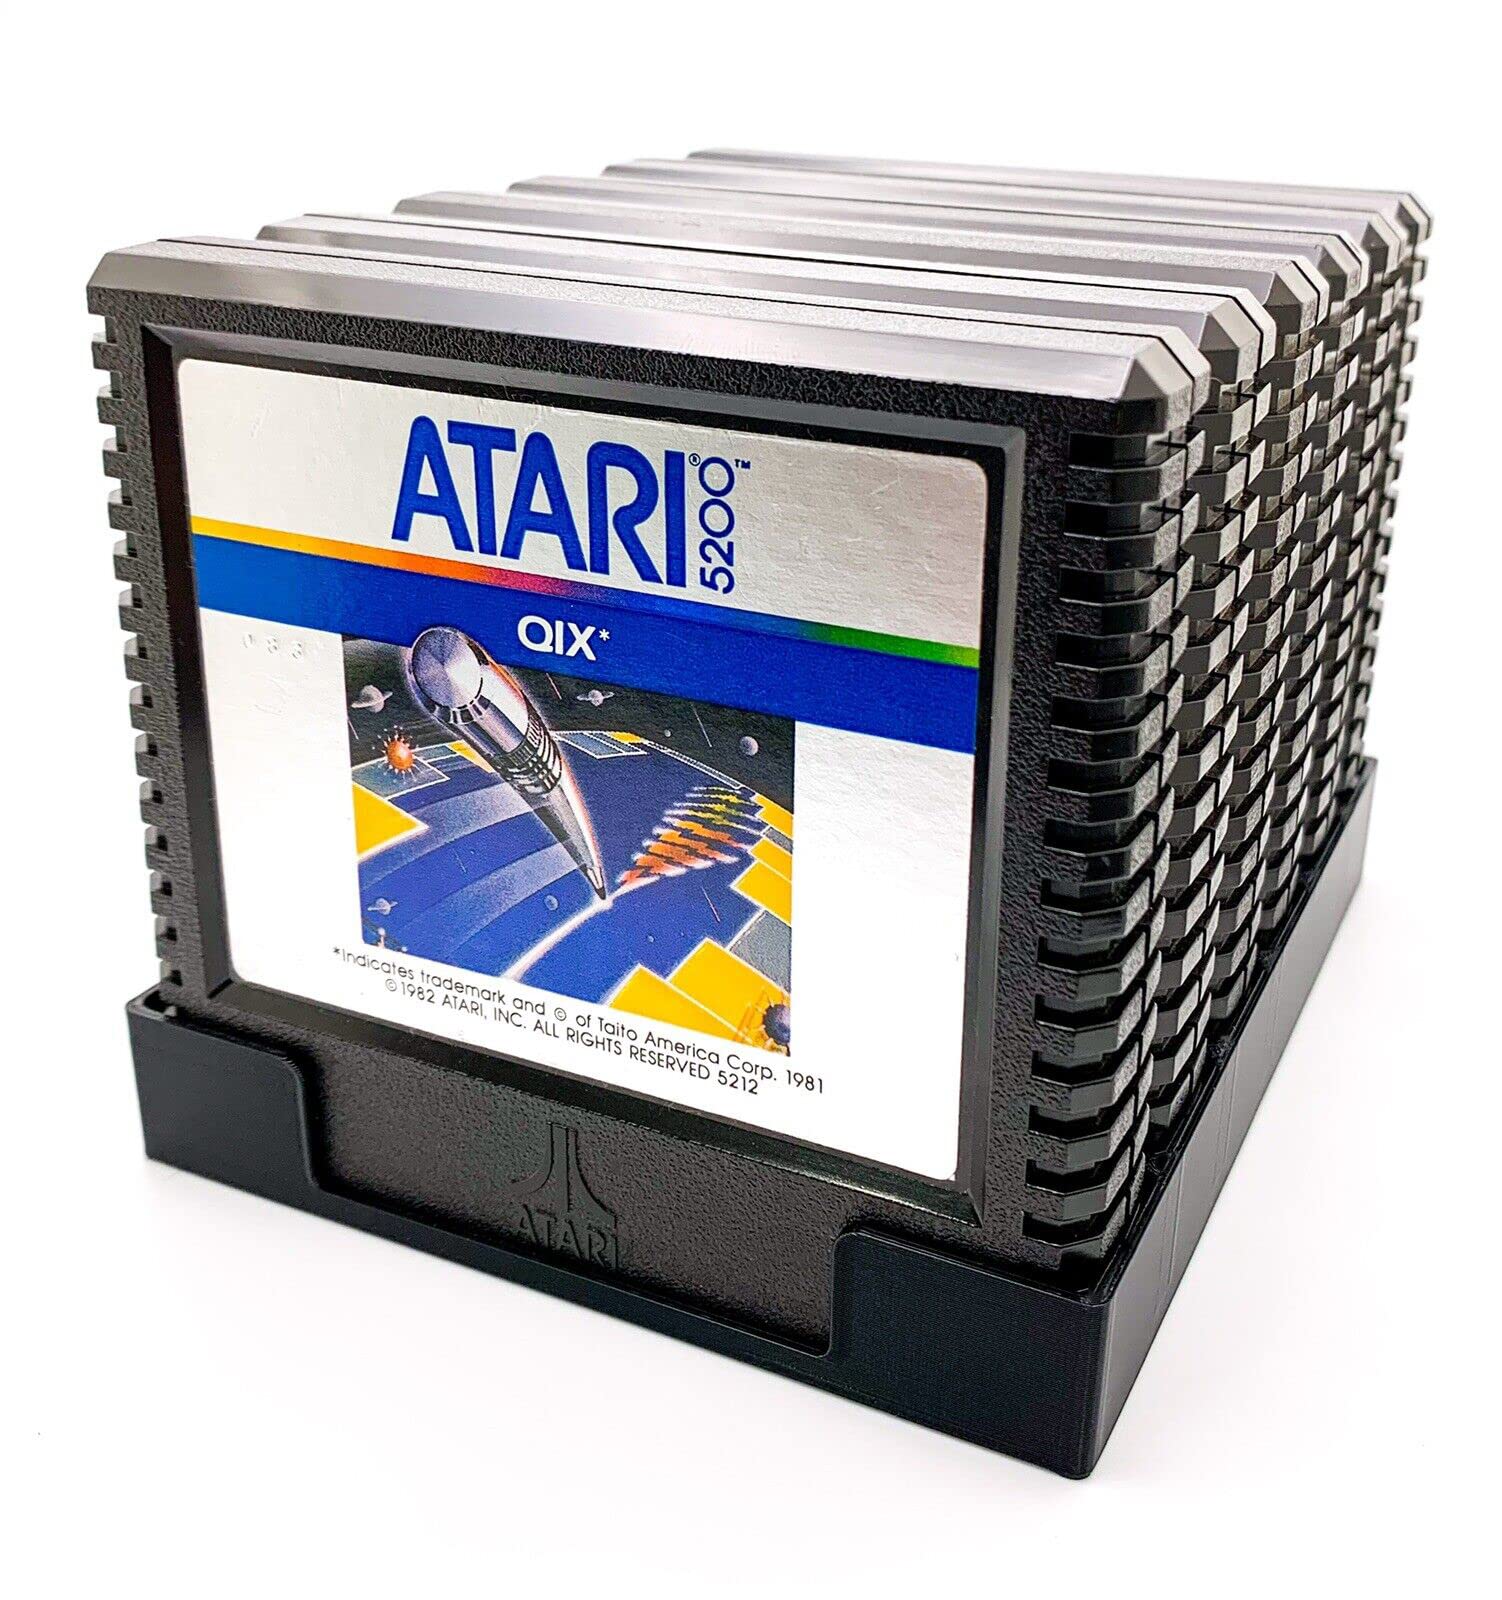 Game Cartridge Holder for Atari 5200 - Tray Holds Up To 6 Games - 5200 Display